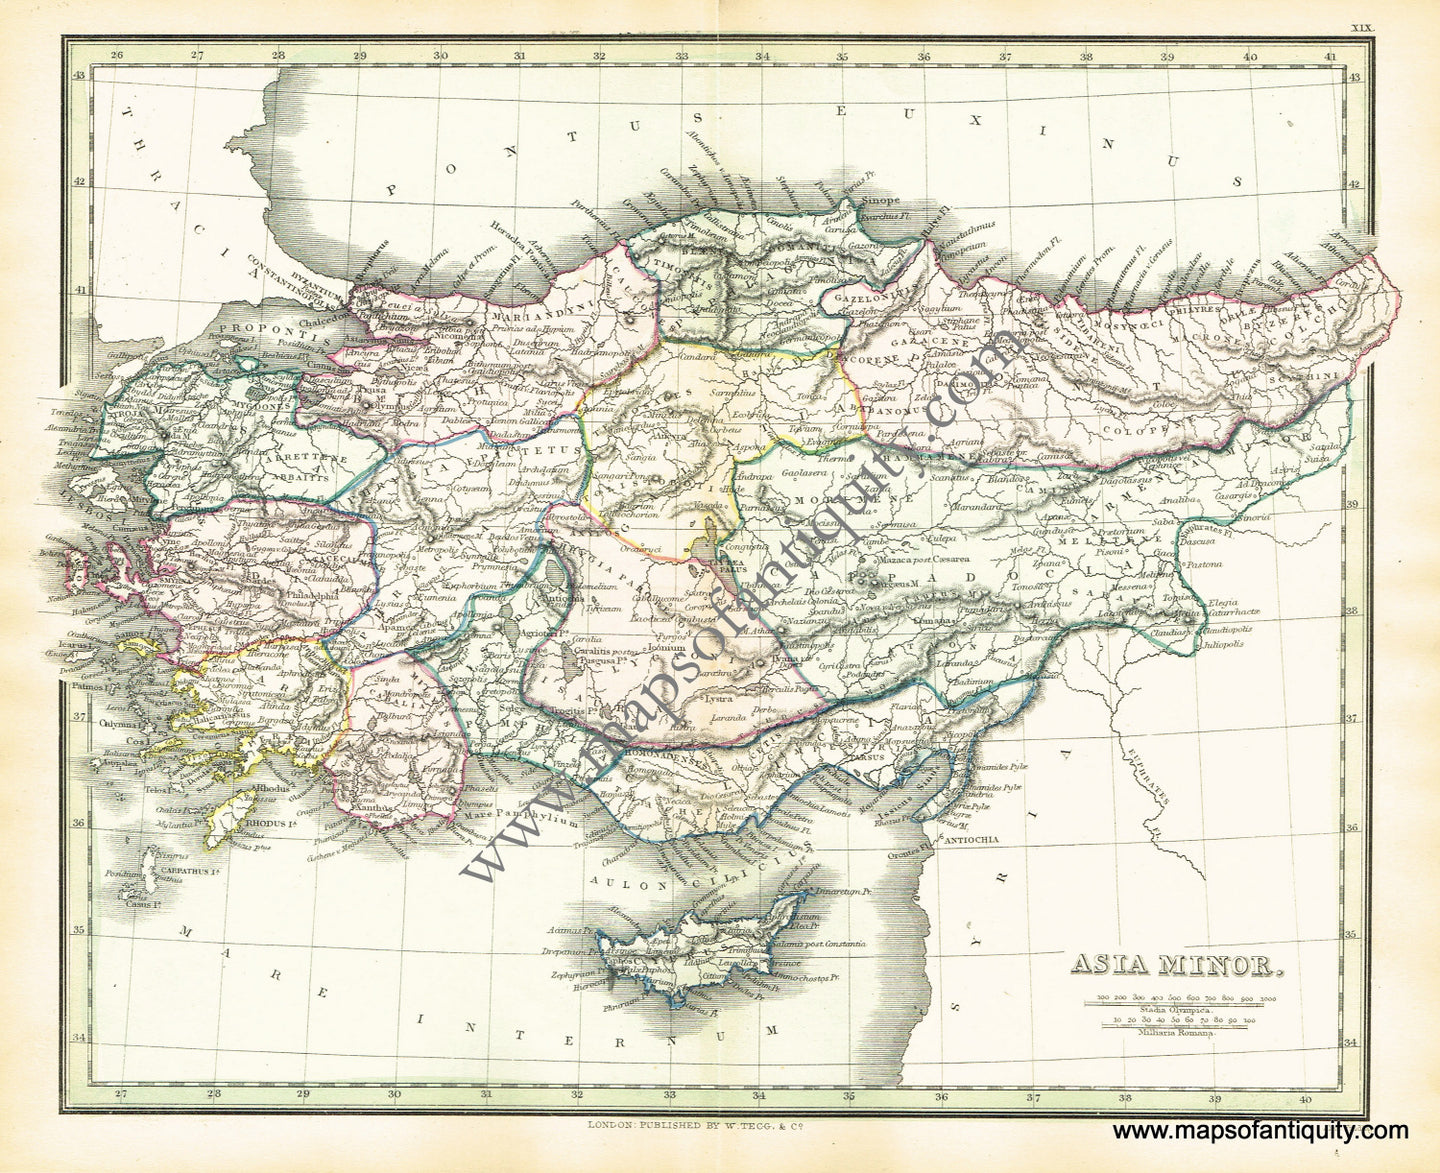 Antique-Hand-Colored-Map-Asia-Minor-(Turkey)-Asia-Turkey-1854-Findlay-Maps-Of-Antiquity